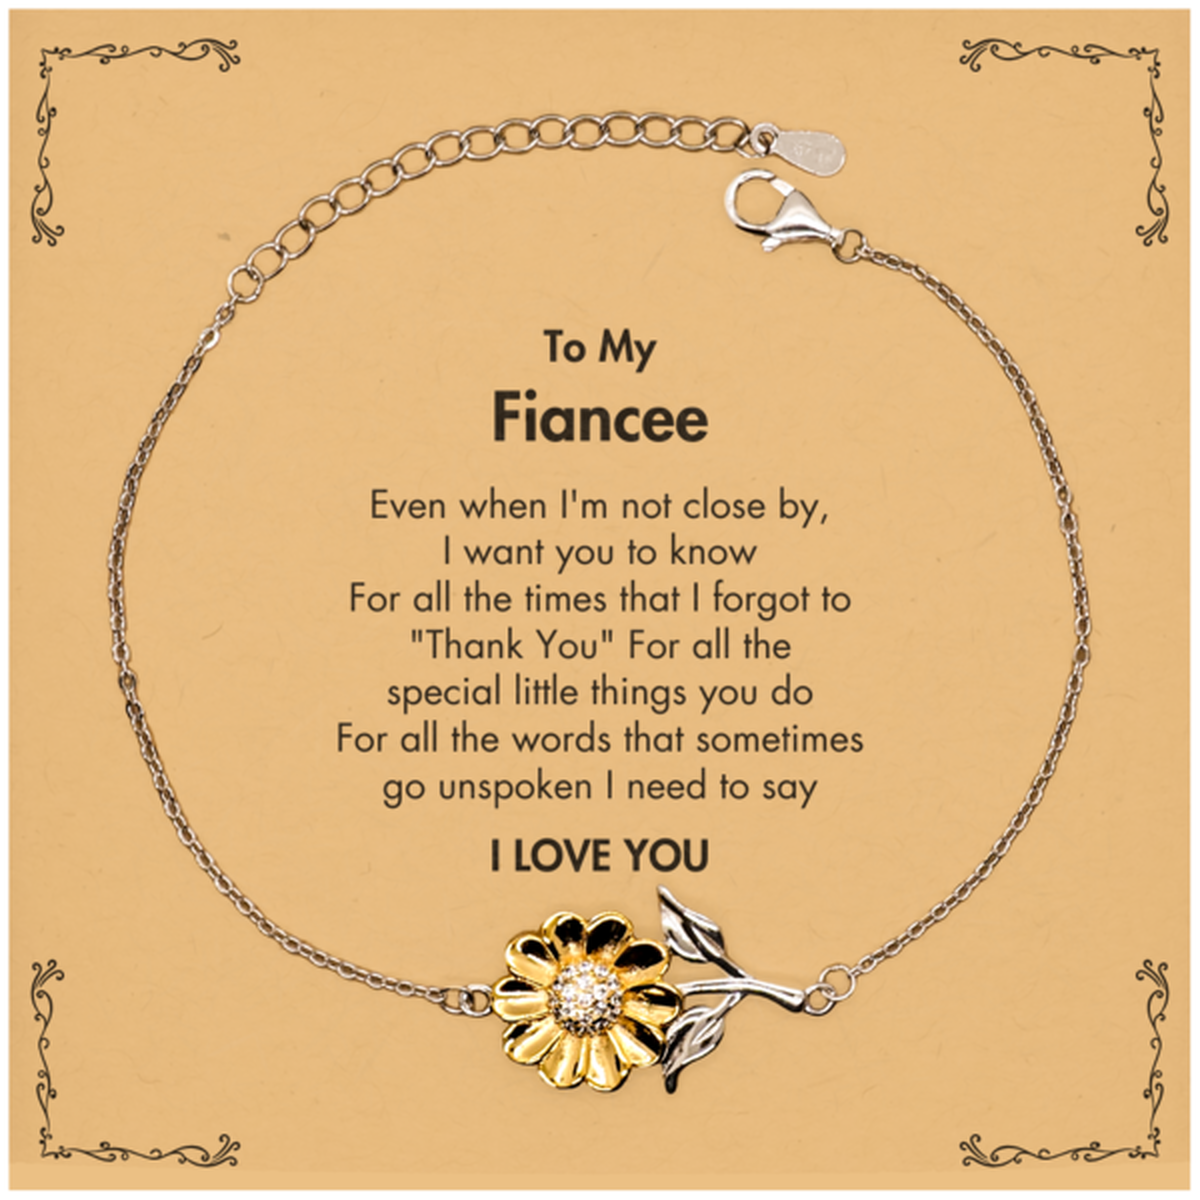 Thank You Gifts for Fiancee, Keepsake Sunflower Bracelet Gifts for Fiancee Birthday Mother's day Father's Day Fiancee For all the words That sometimes go unspoken I need to say I LOVE YOU